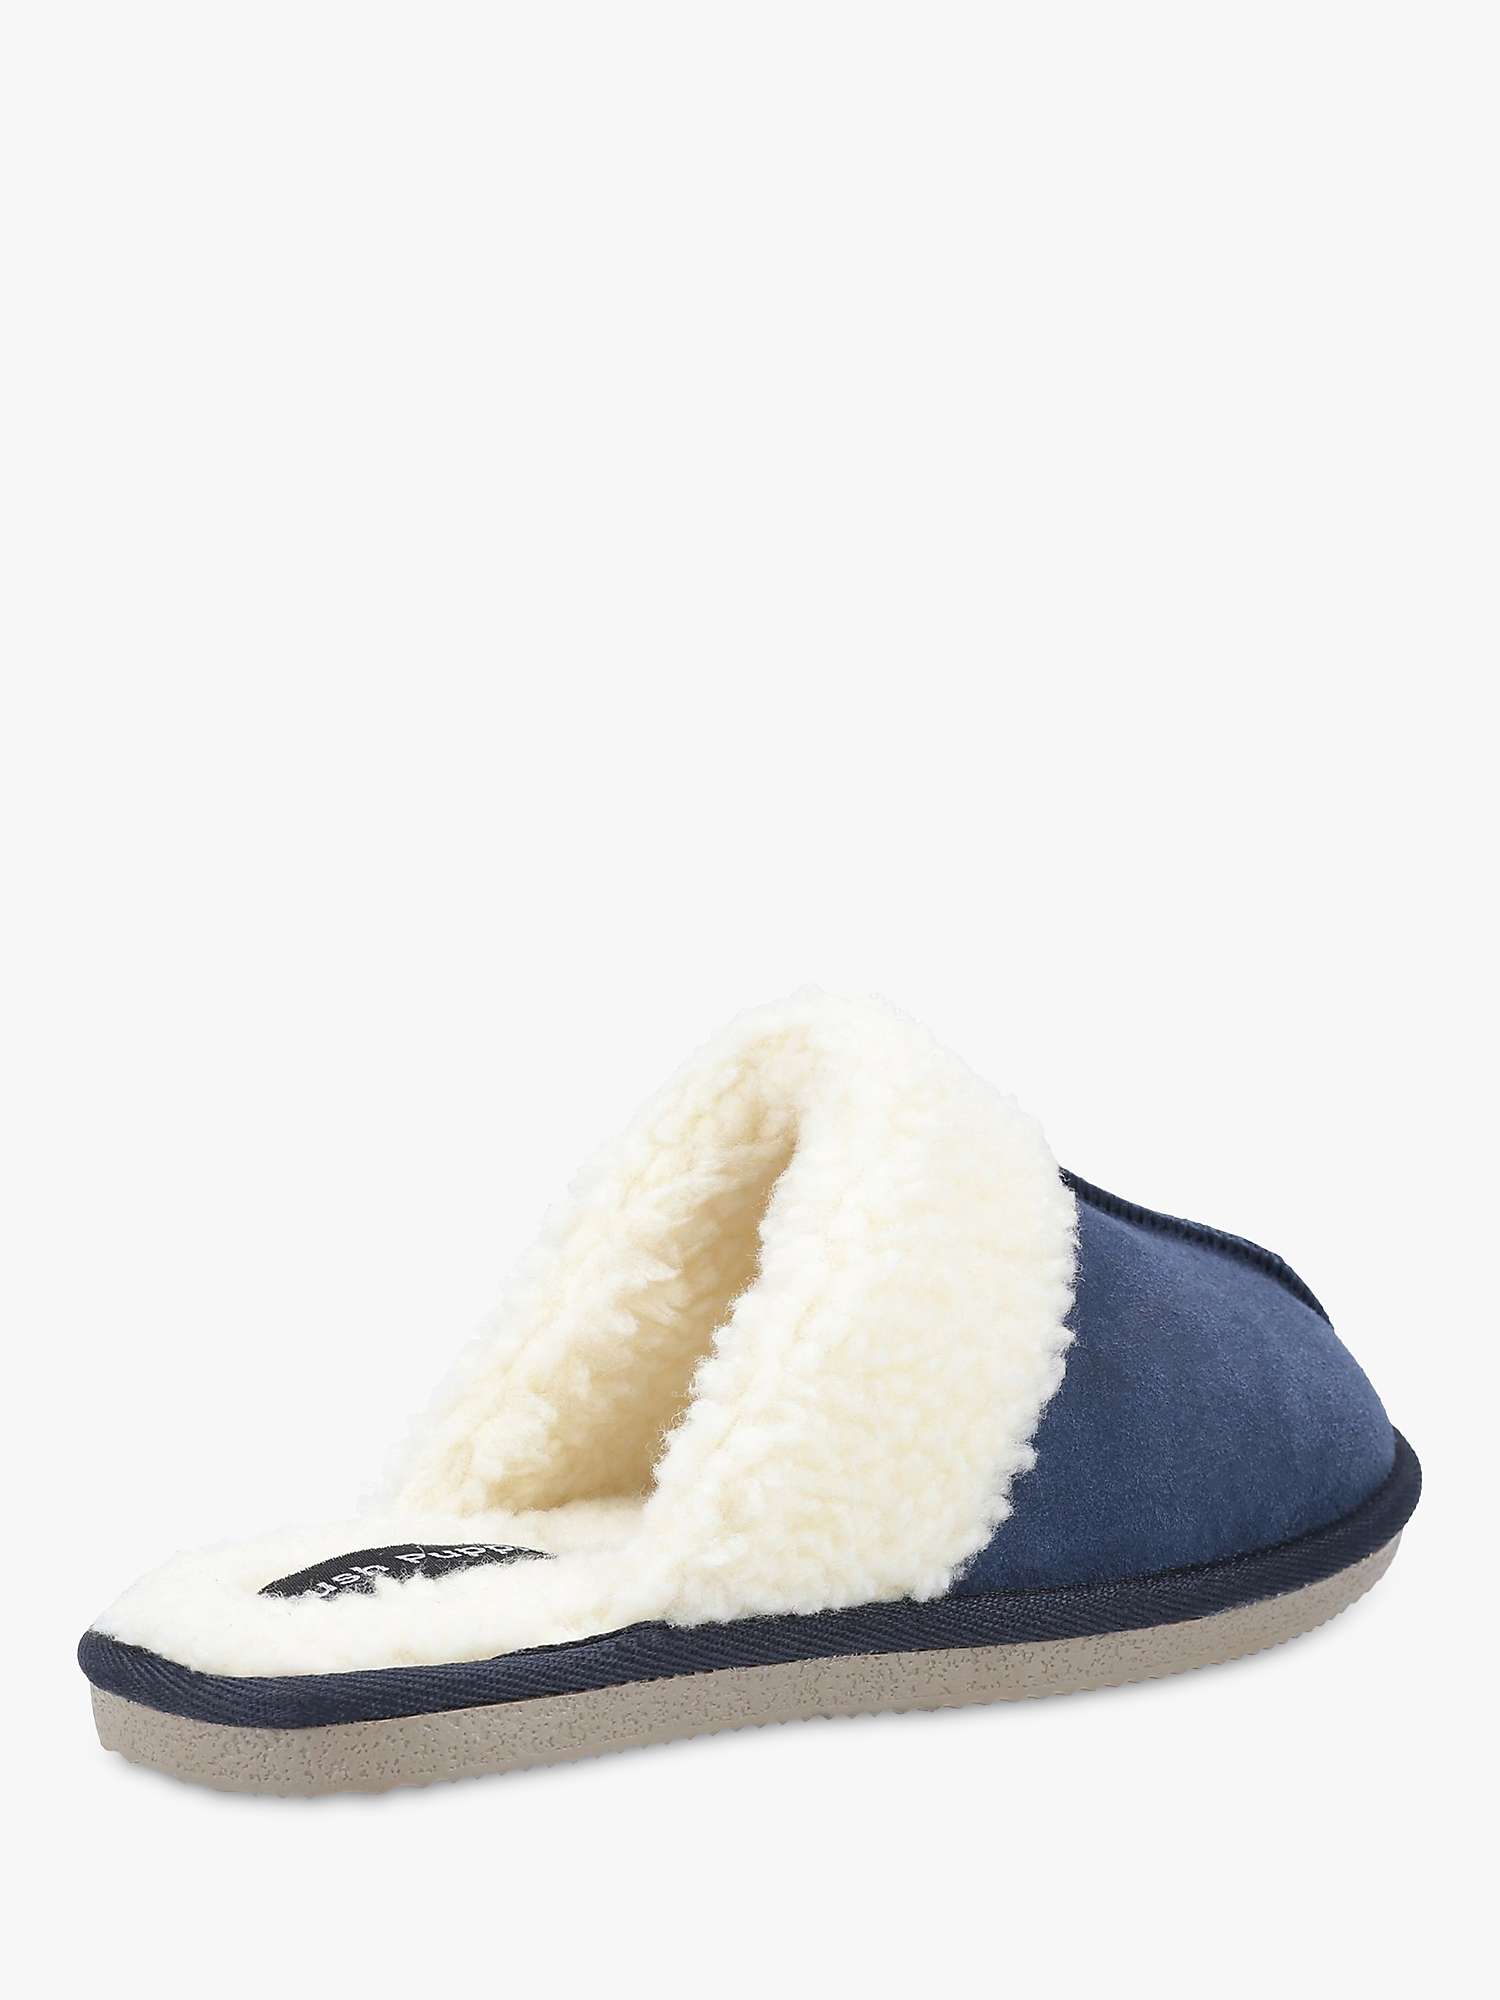 Buy Hush Puppies Arianna Mule Slippers, Navy Online at johnlewis.com